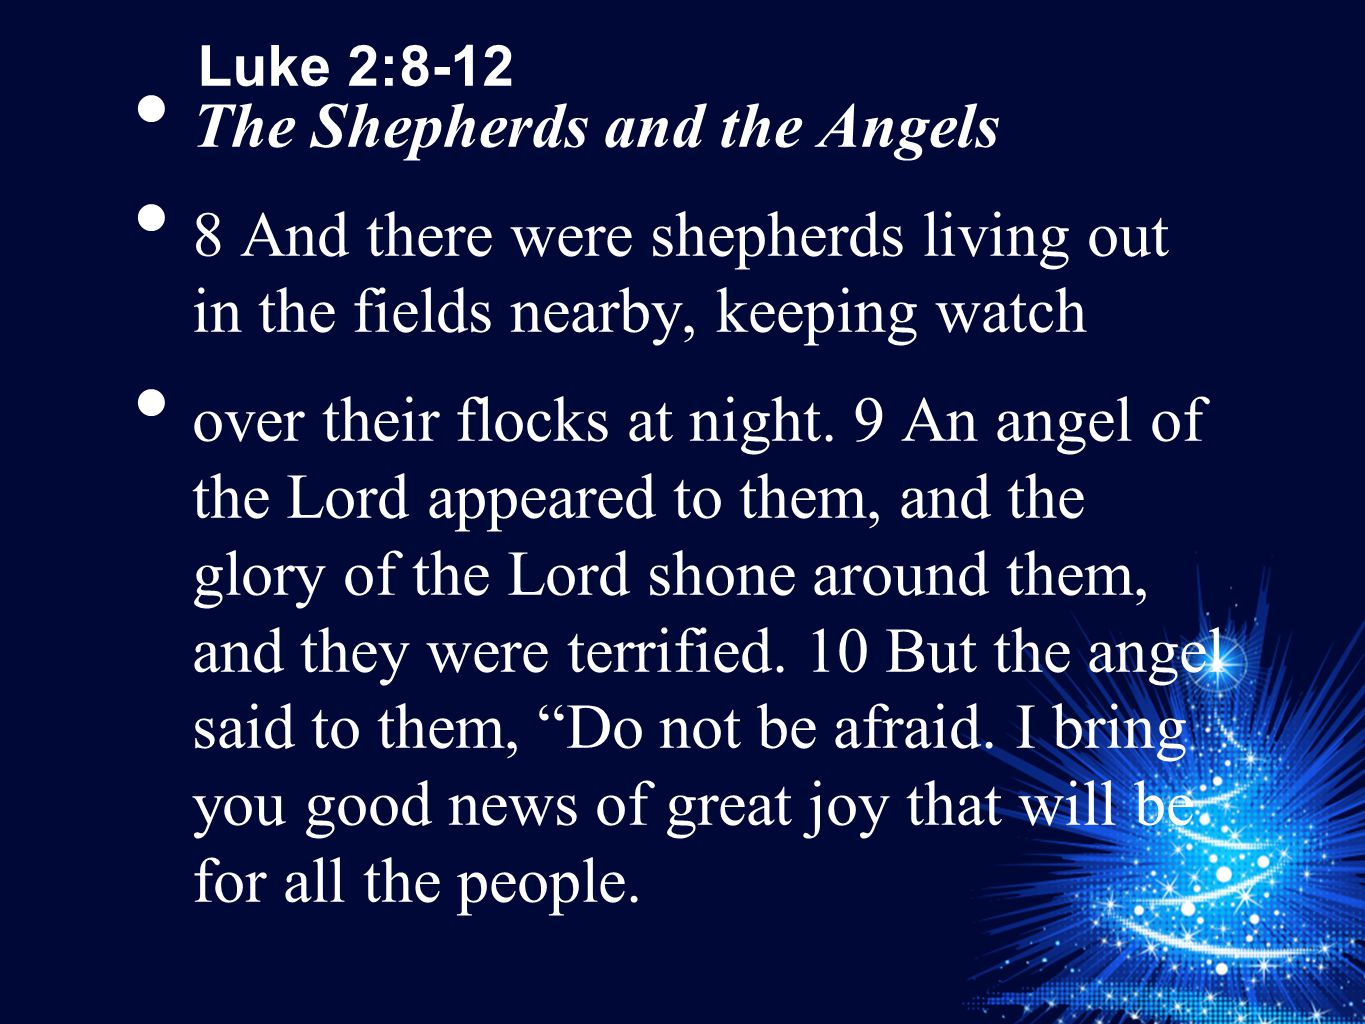 Luke 2:8-12 The Shepherds and the Angels 8 And there were shepherds living out in the fields nearby, keeping watch over their flocks at night.